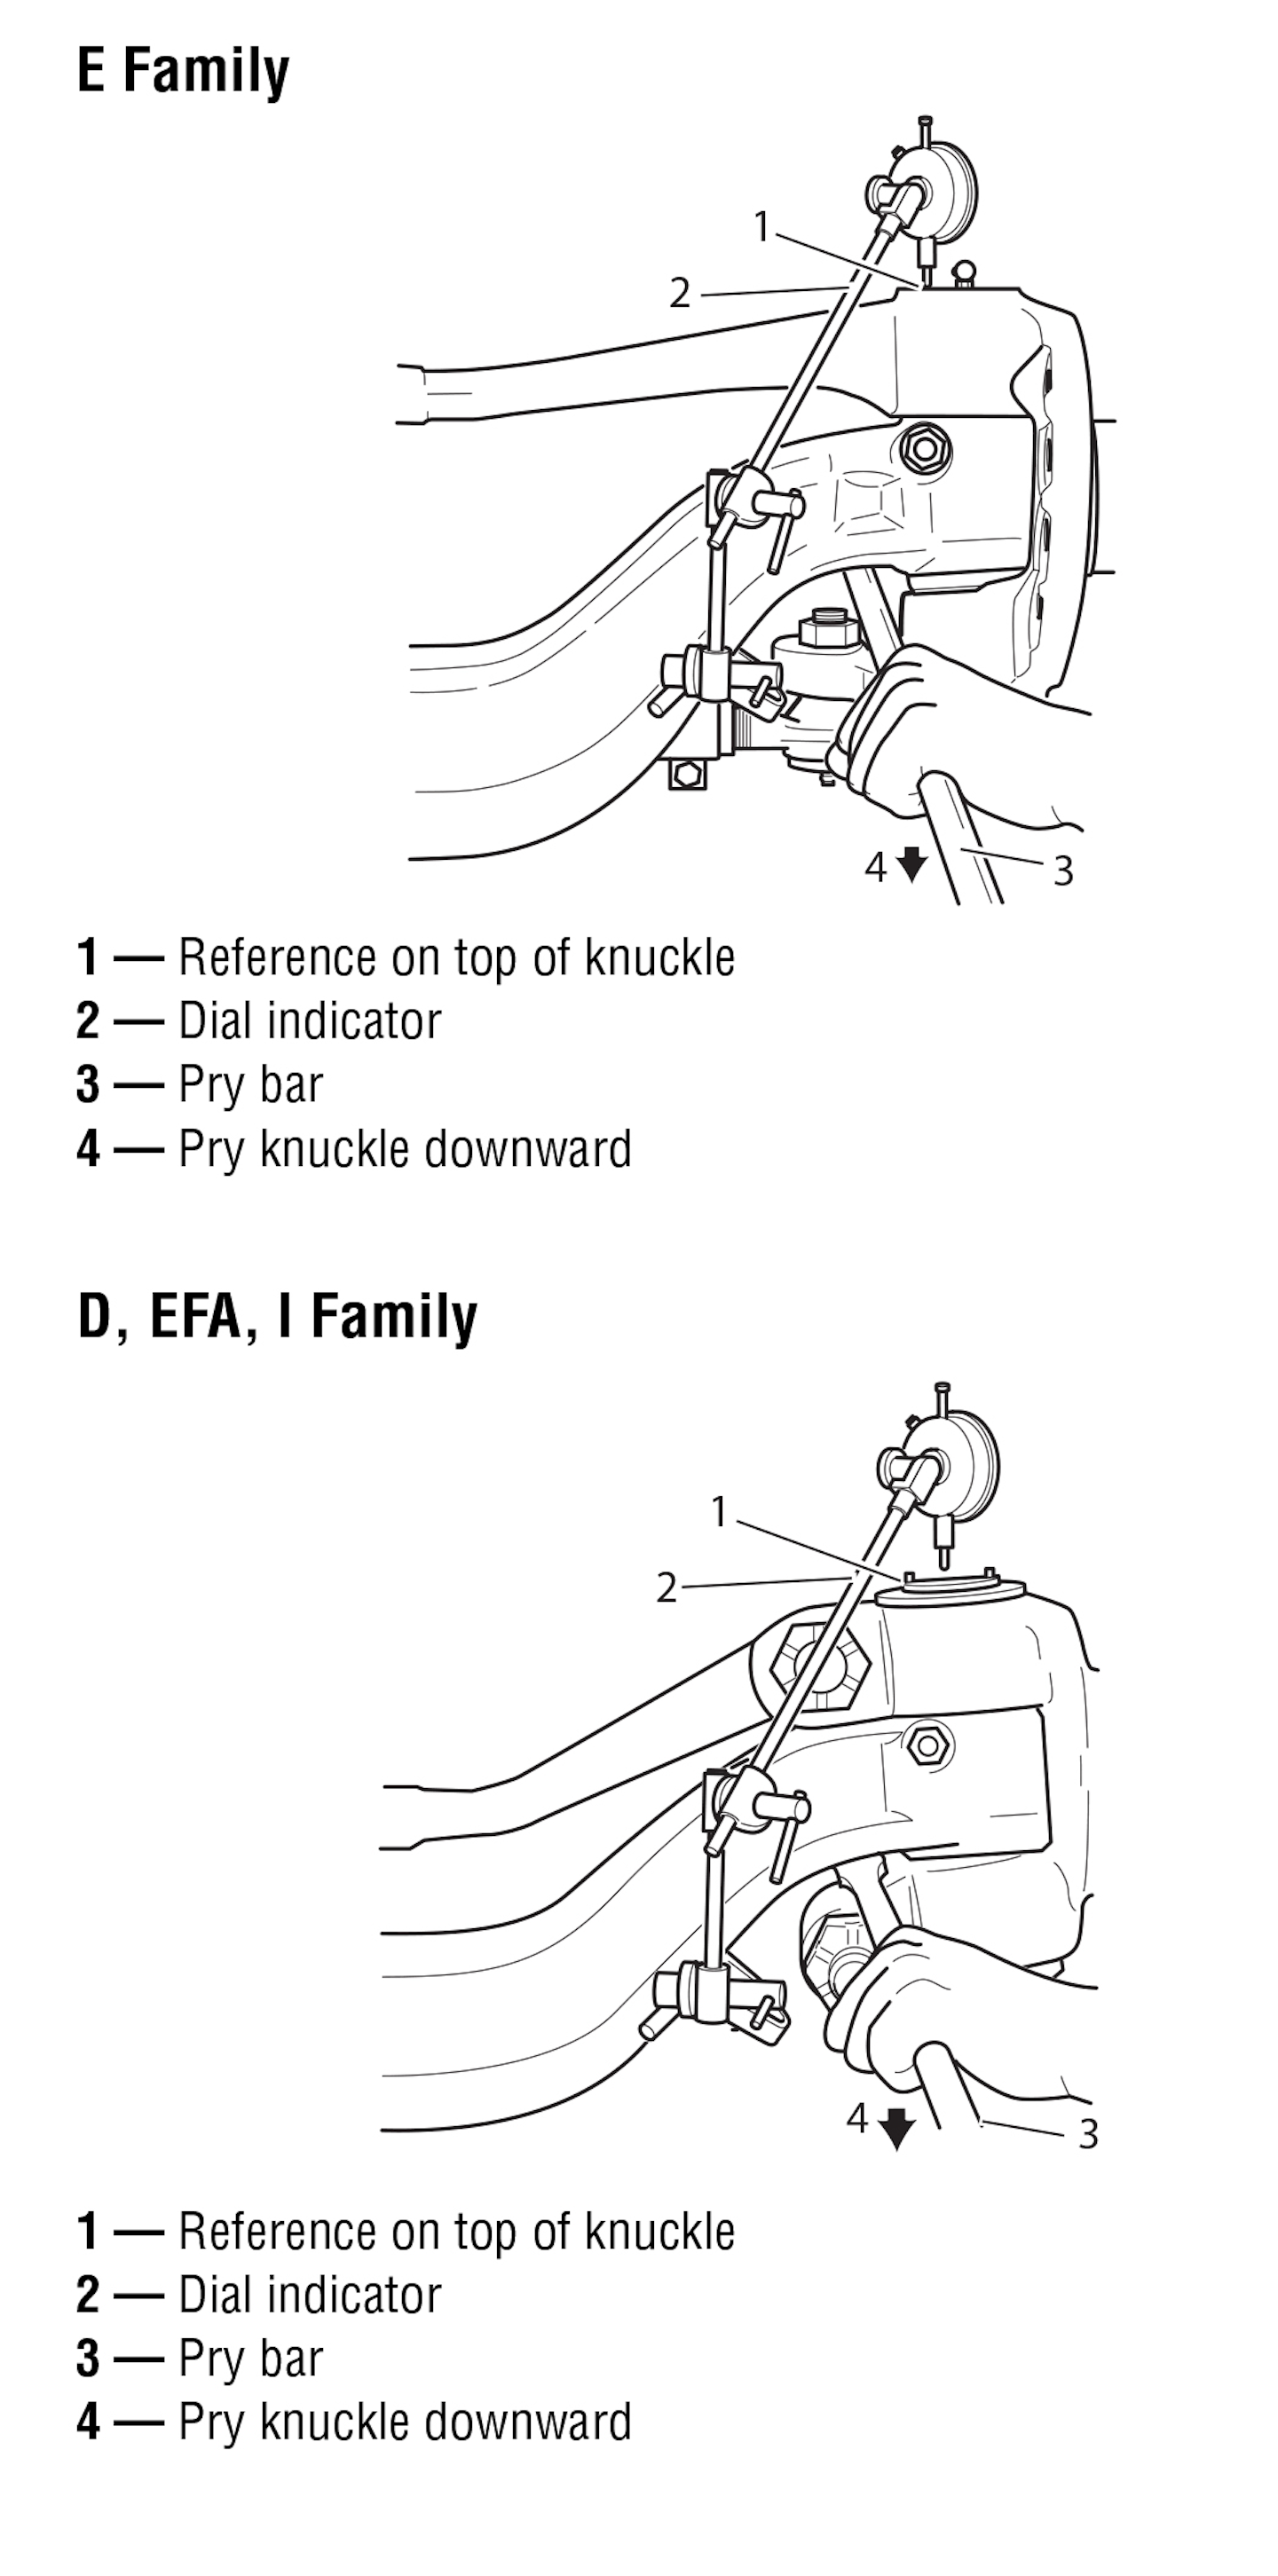 Dana Aftermarket suggests performing the following knuckle vertical play inspection method to understand kingpin wear. Mount a dial indicator on the axle beam; reference the dial indicator probe on the knuckle cap; using a lever, pry the steering knuckle downward; zero the dial indicator; using a lever, pry the steering knuckle upward. Note the indicator reading.